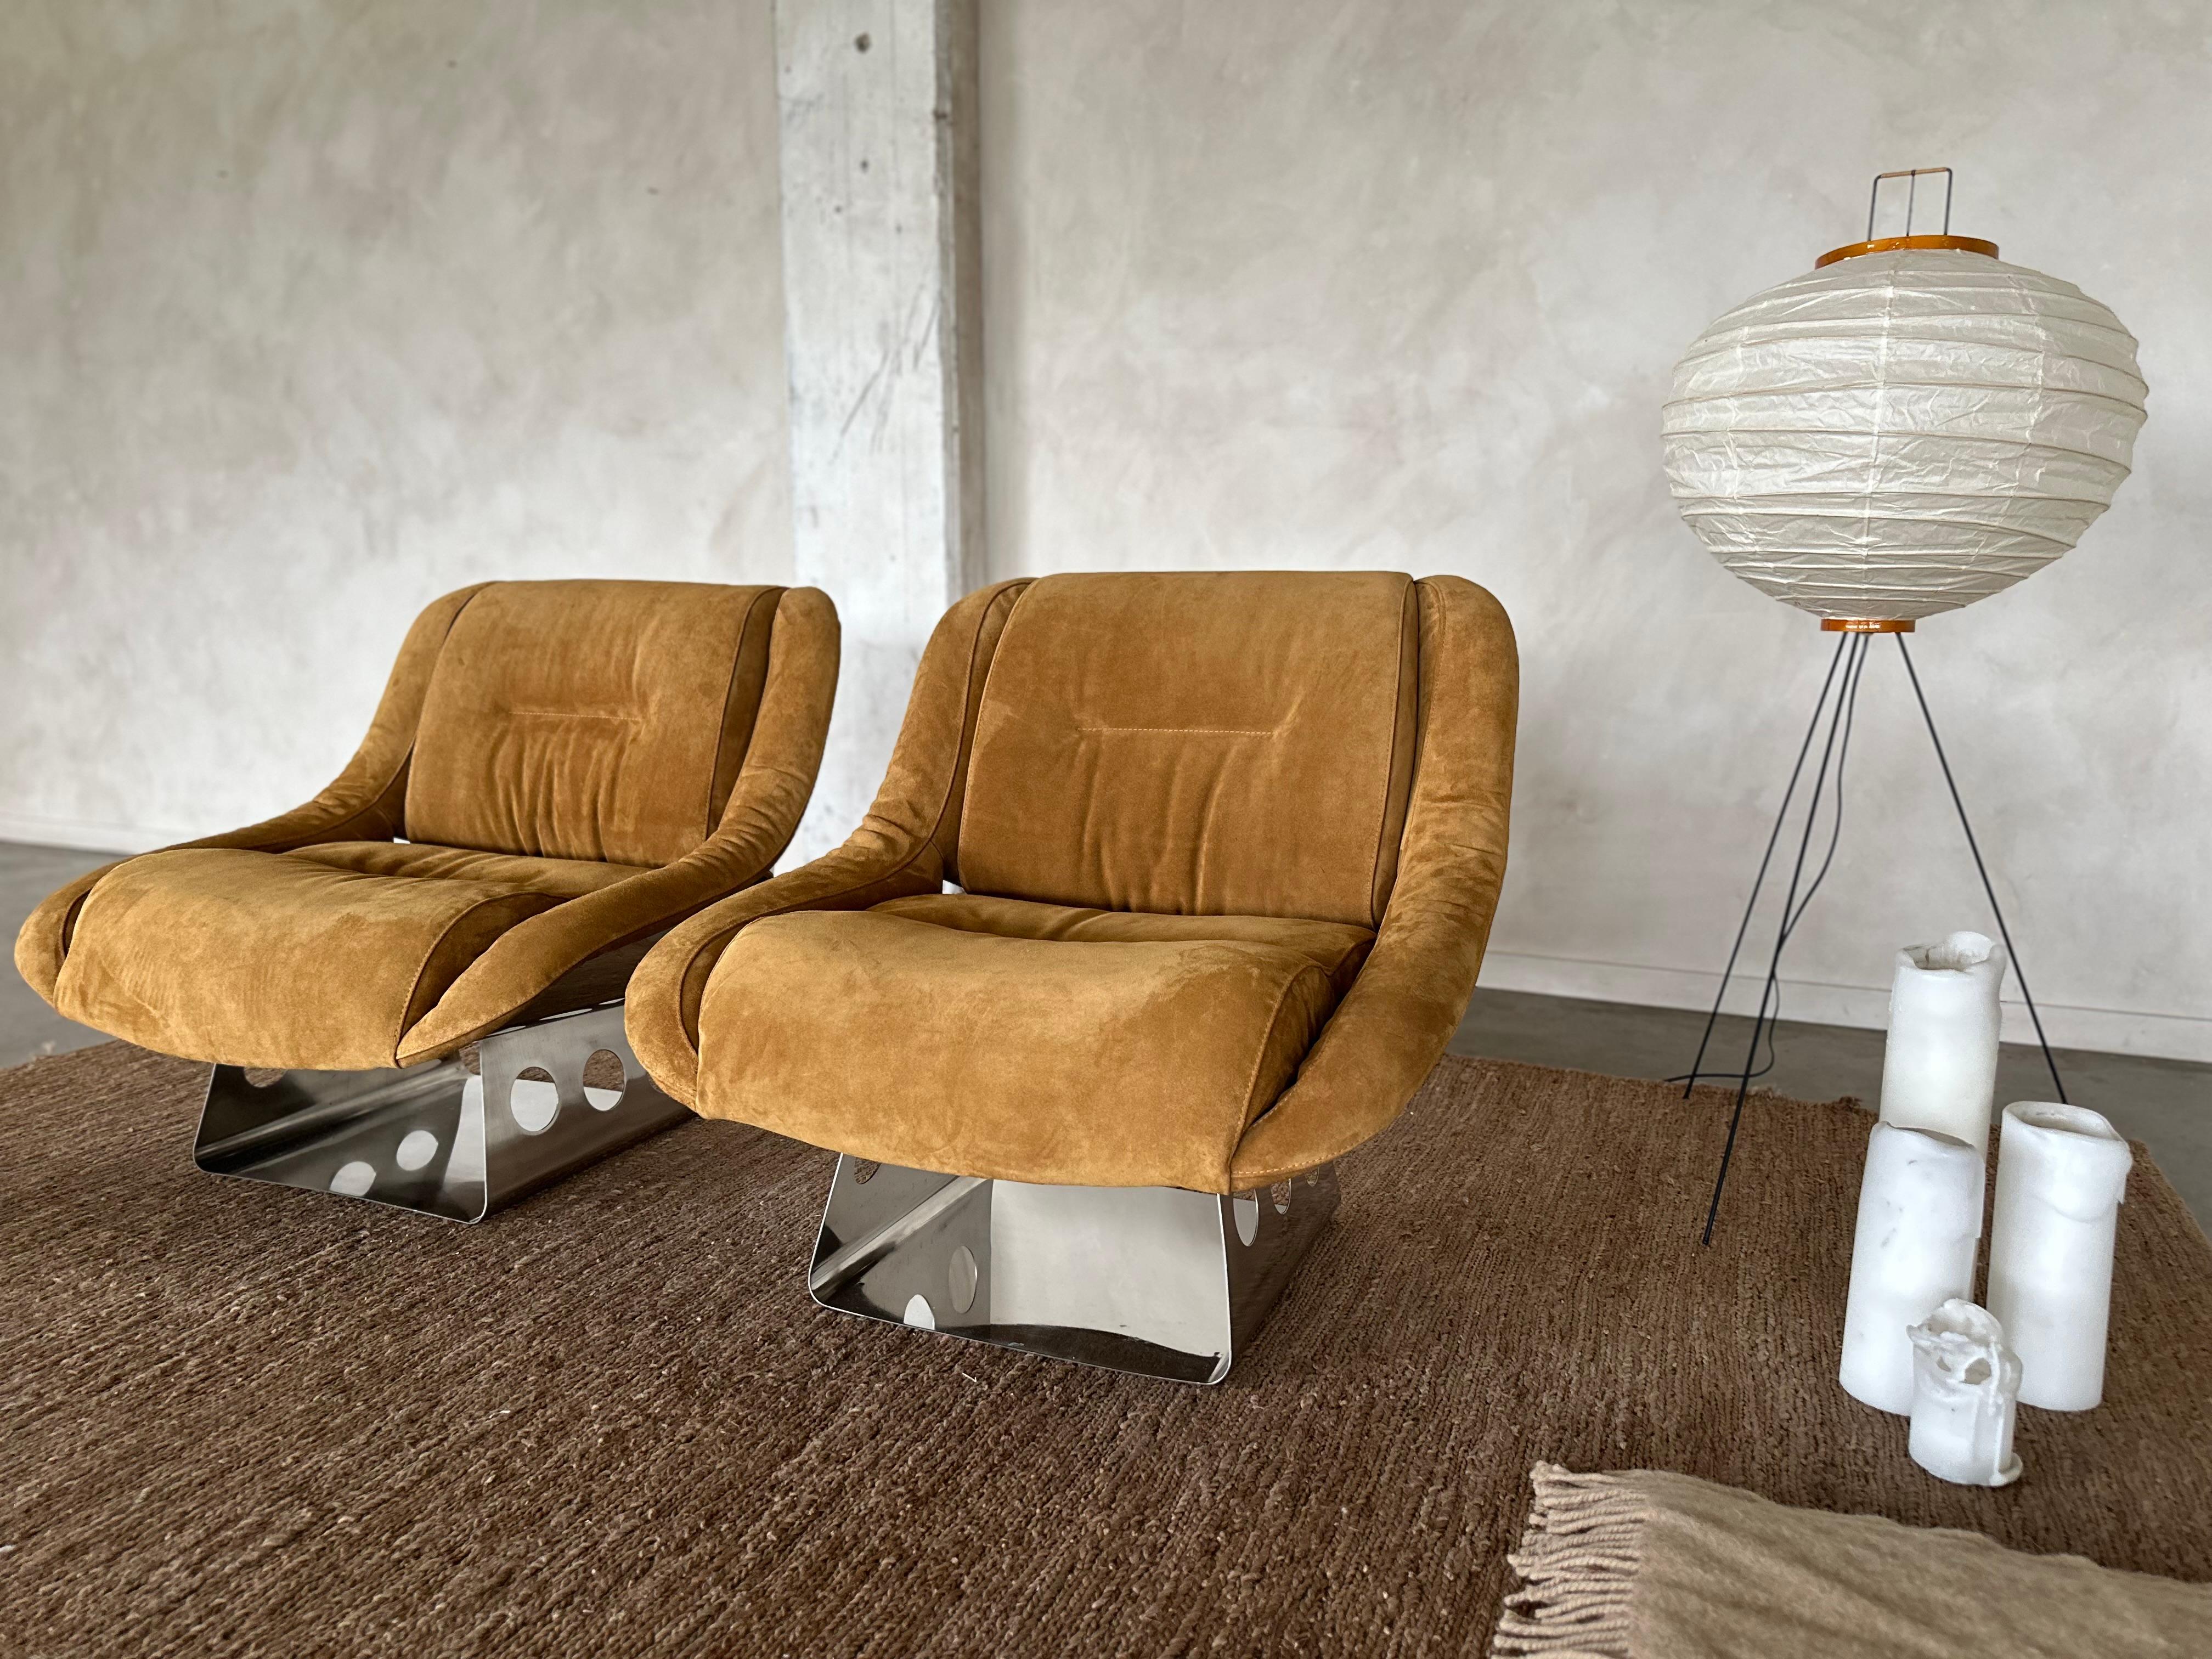 Rare Suede and Stainless Steel Lounge Chairs by Rima Padova, 1974 8